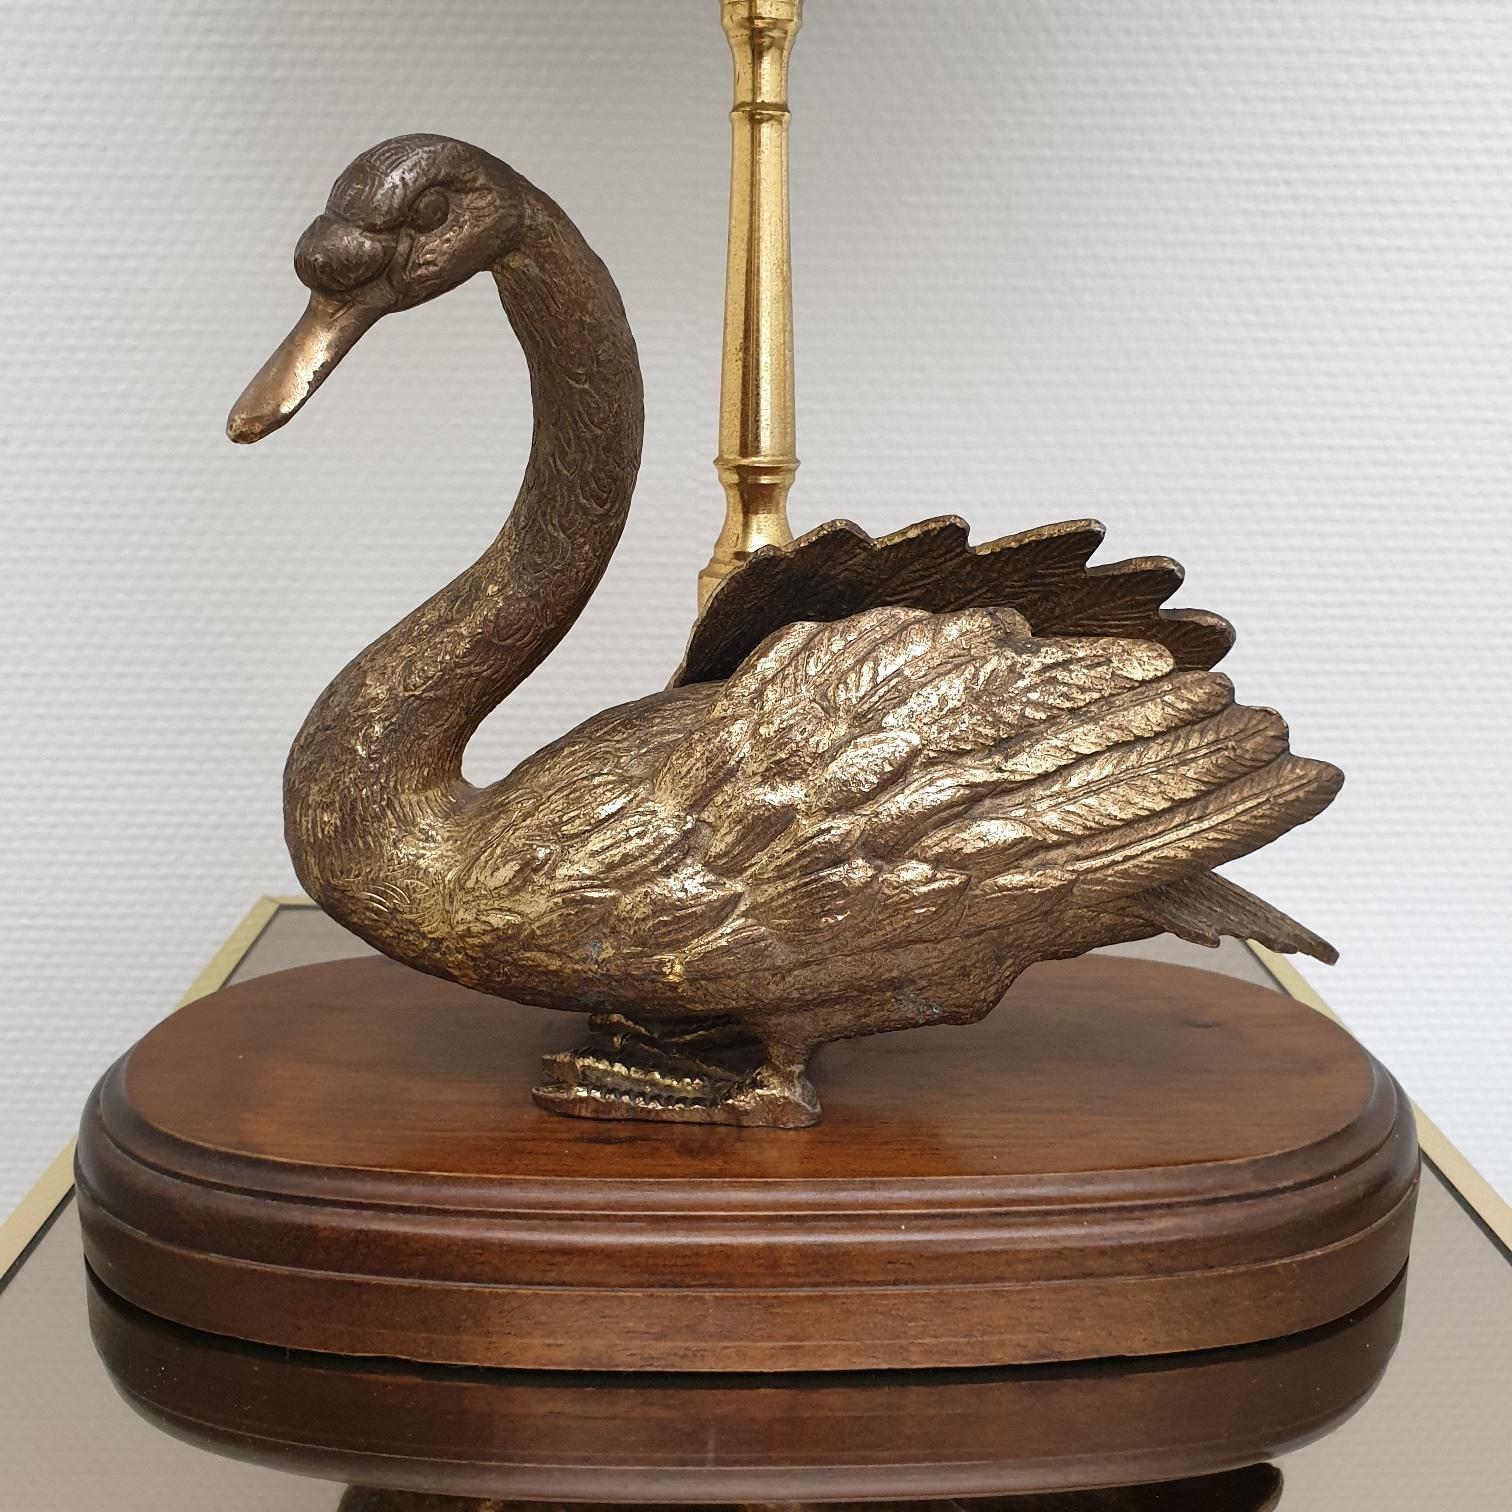 Vintage brass table lamp with brass duck, 1960s.
With the original oval shade.
In style of Maison Jansen.